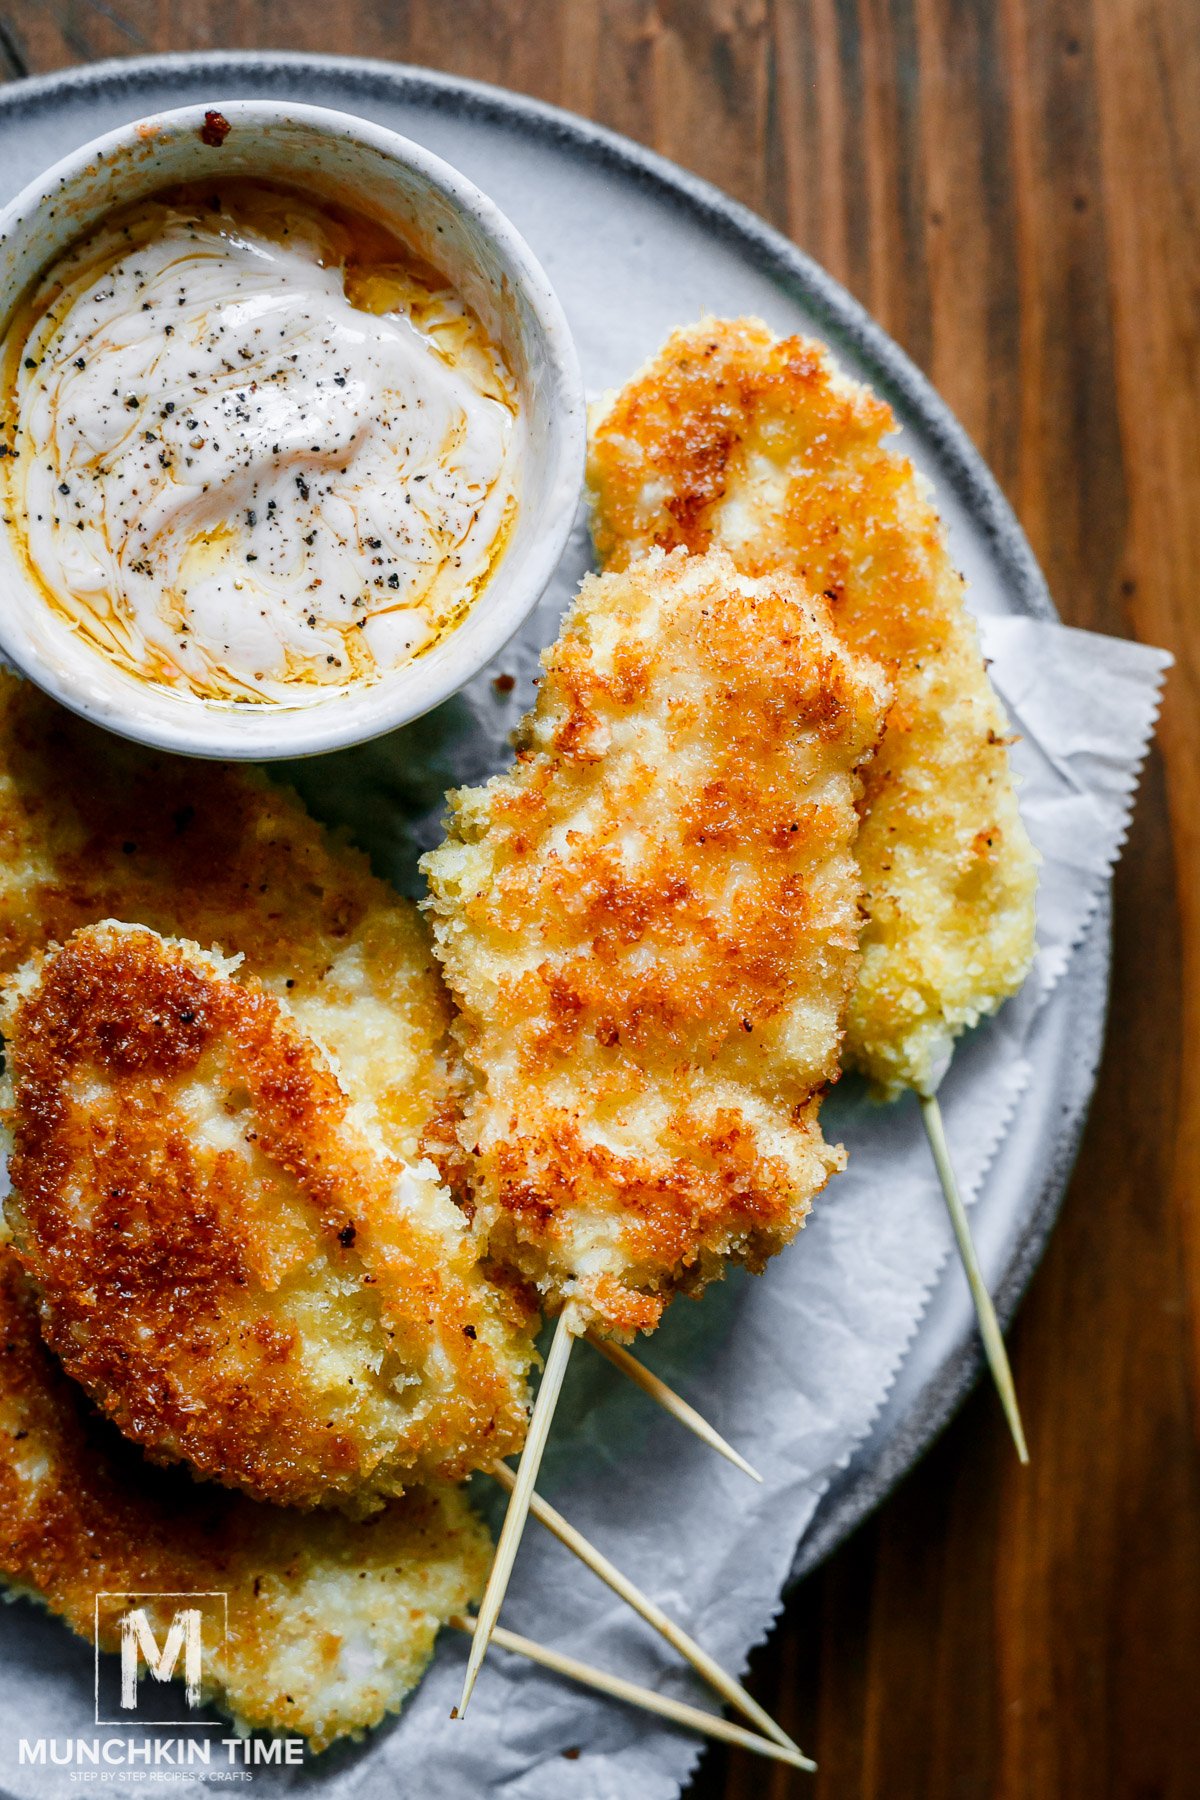 On the plate Chicken Strips on a stick recipe with delicious homemade dipping sauce.